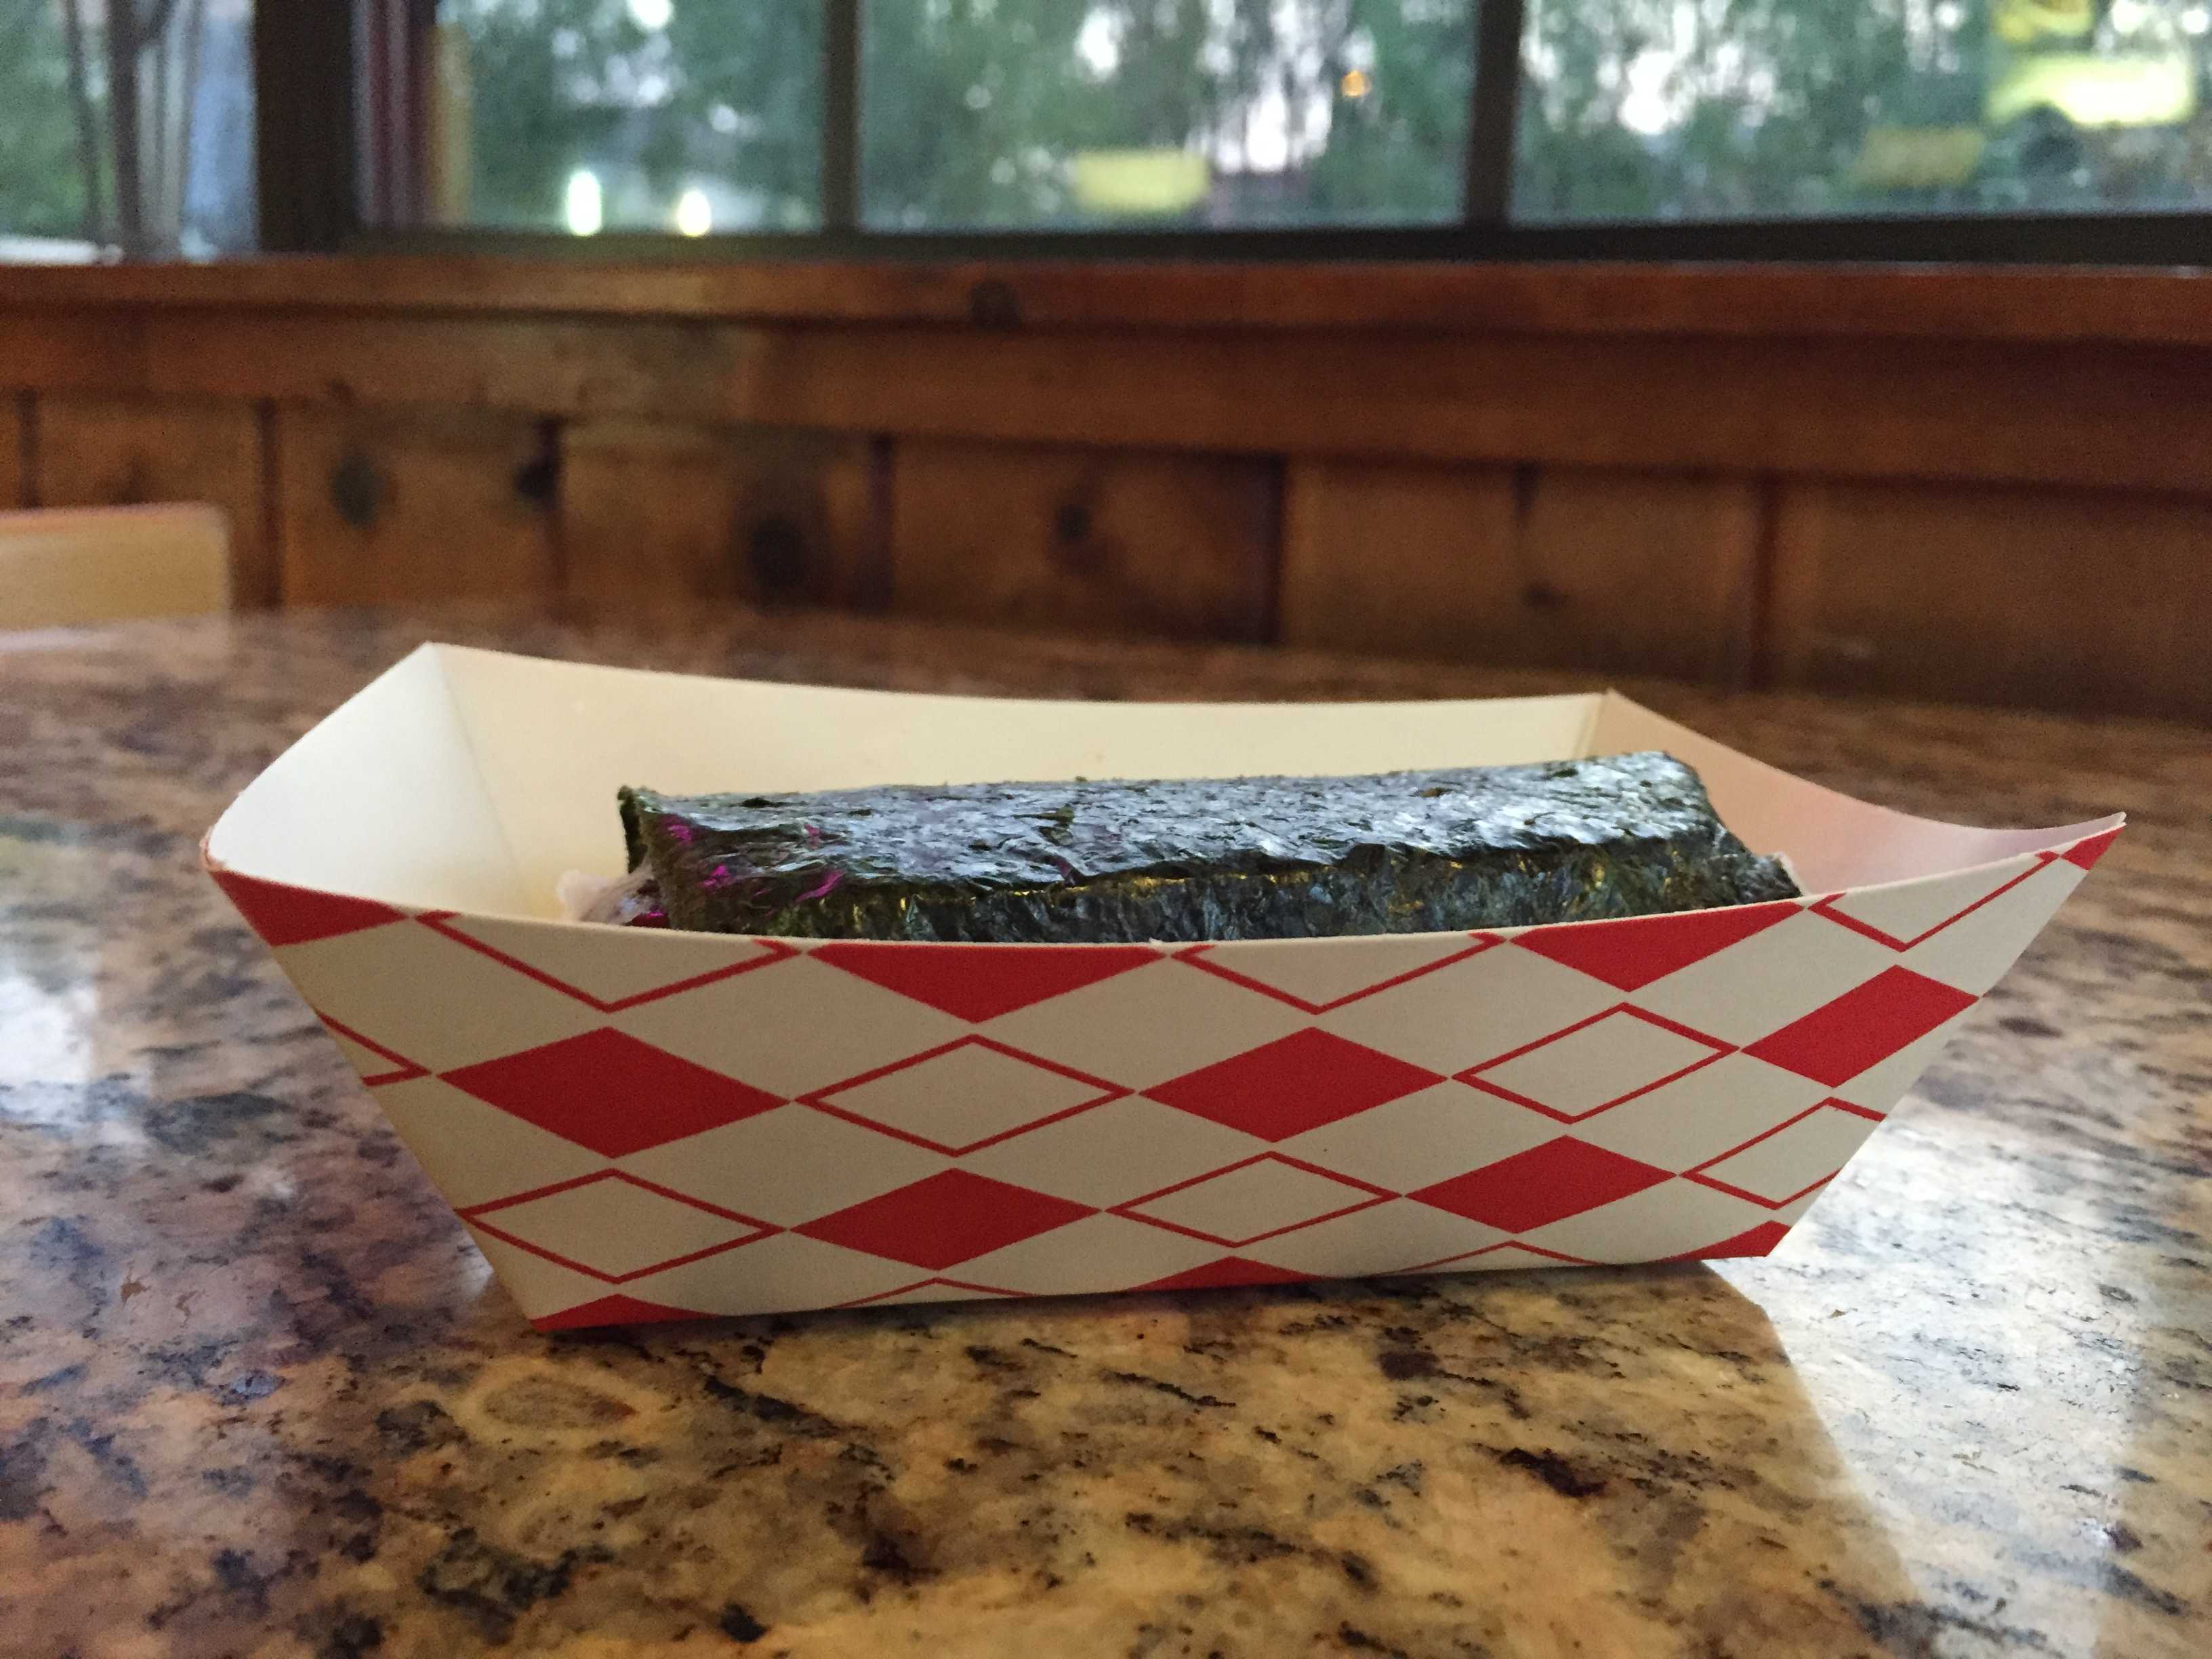 The spam Musubi is a flattened five-inch roll of rice and a slab of spam. The dish is $1.85, a relatively fair price. Photos by Caitlyn Tjong.